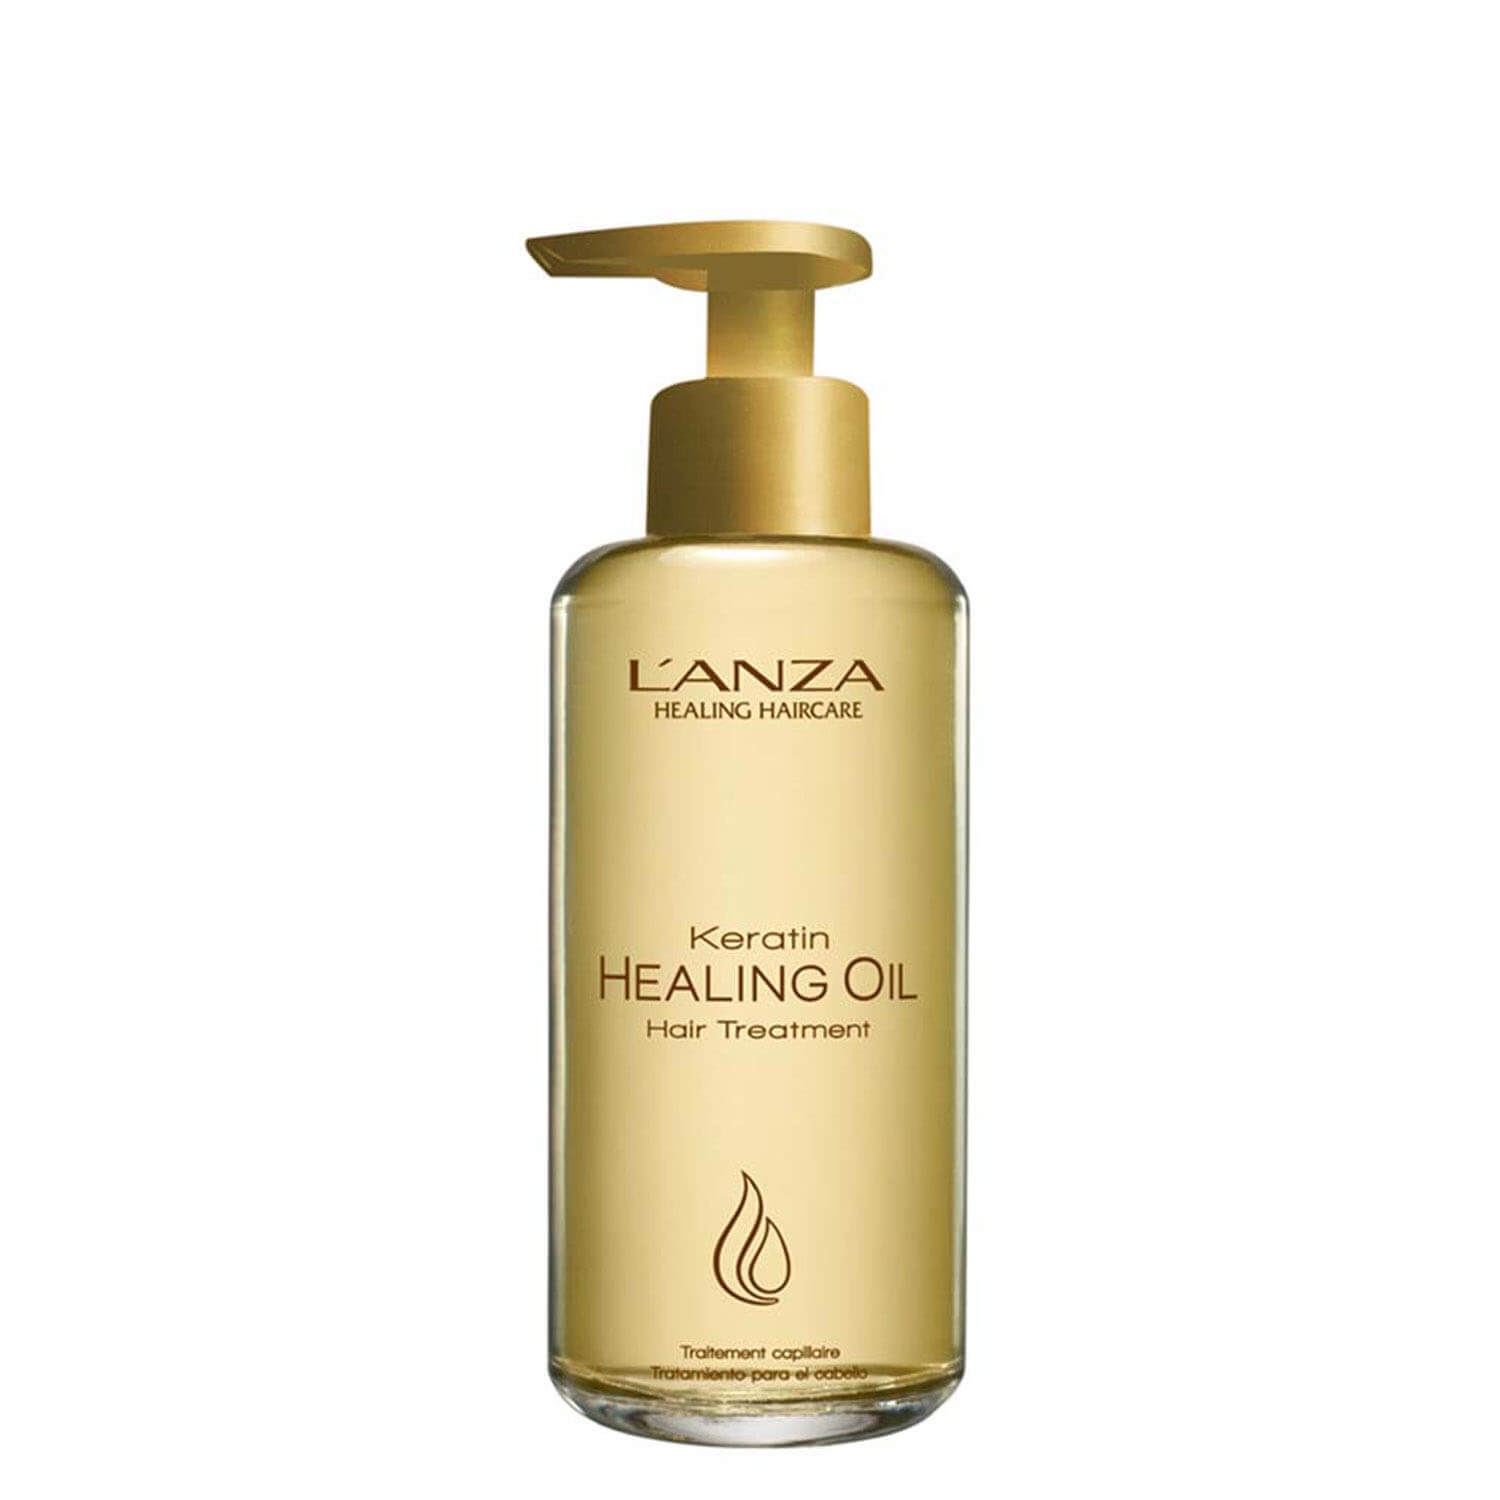 Product image from Keratin Healing Oil - Hair Treatment